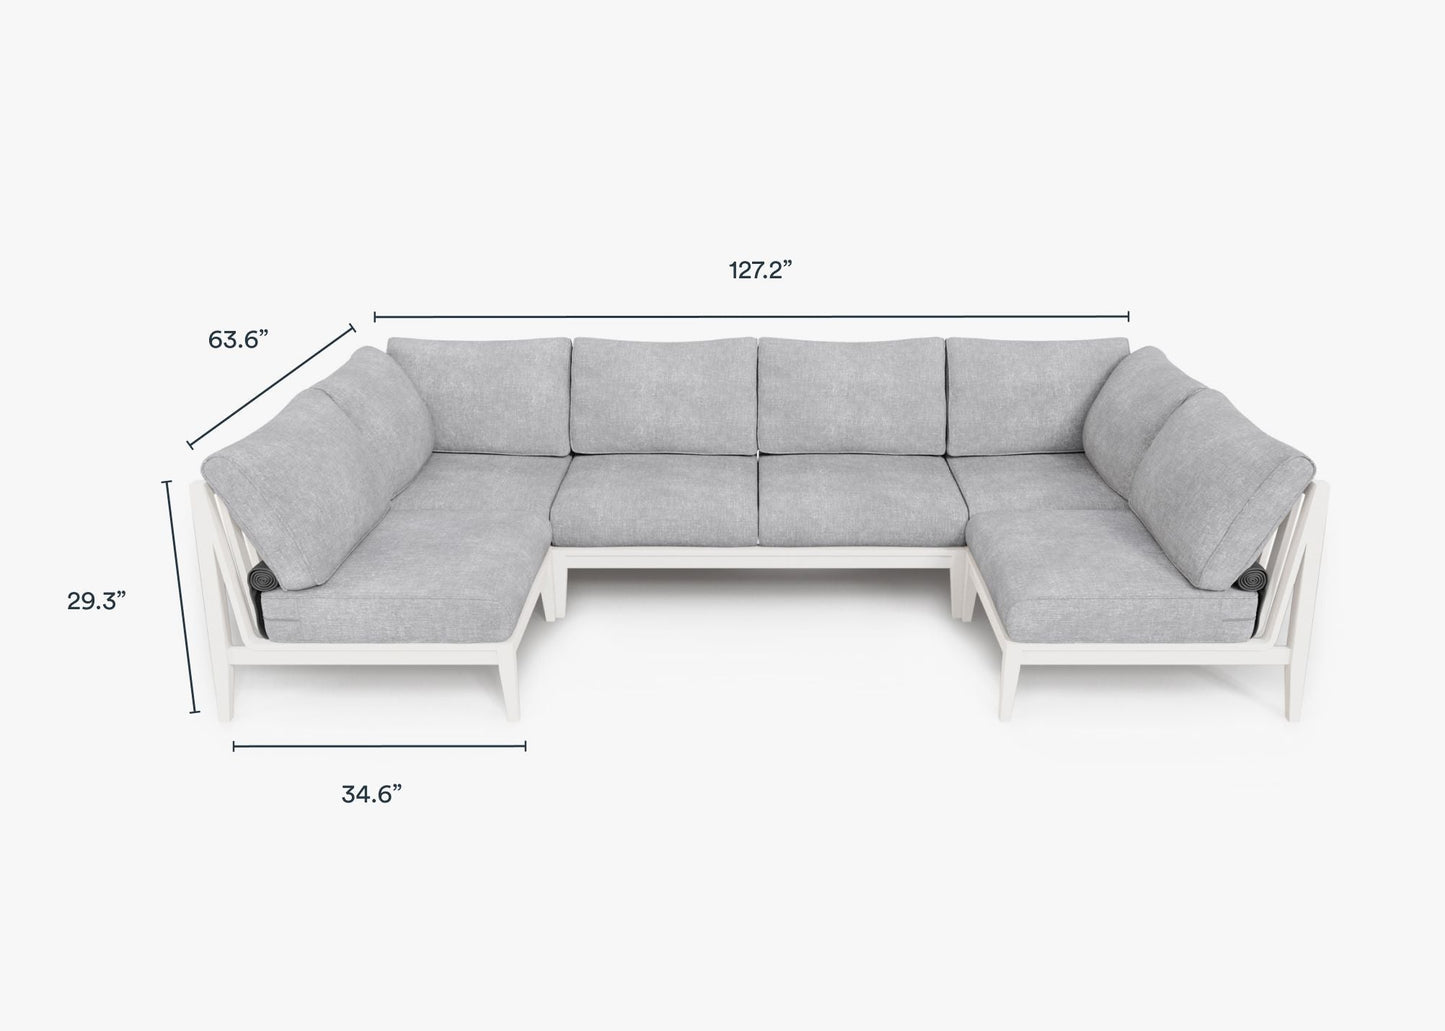 Live Outer 127" x 64" White Aluminum Outdoor U Sectional 6-Seat With Pacific Fog Gray Cushion